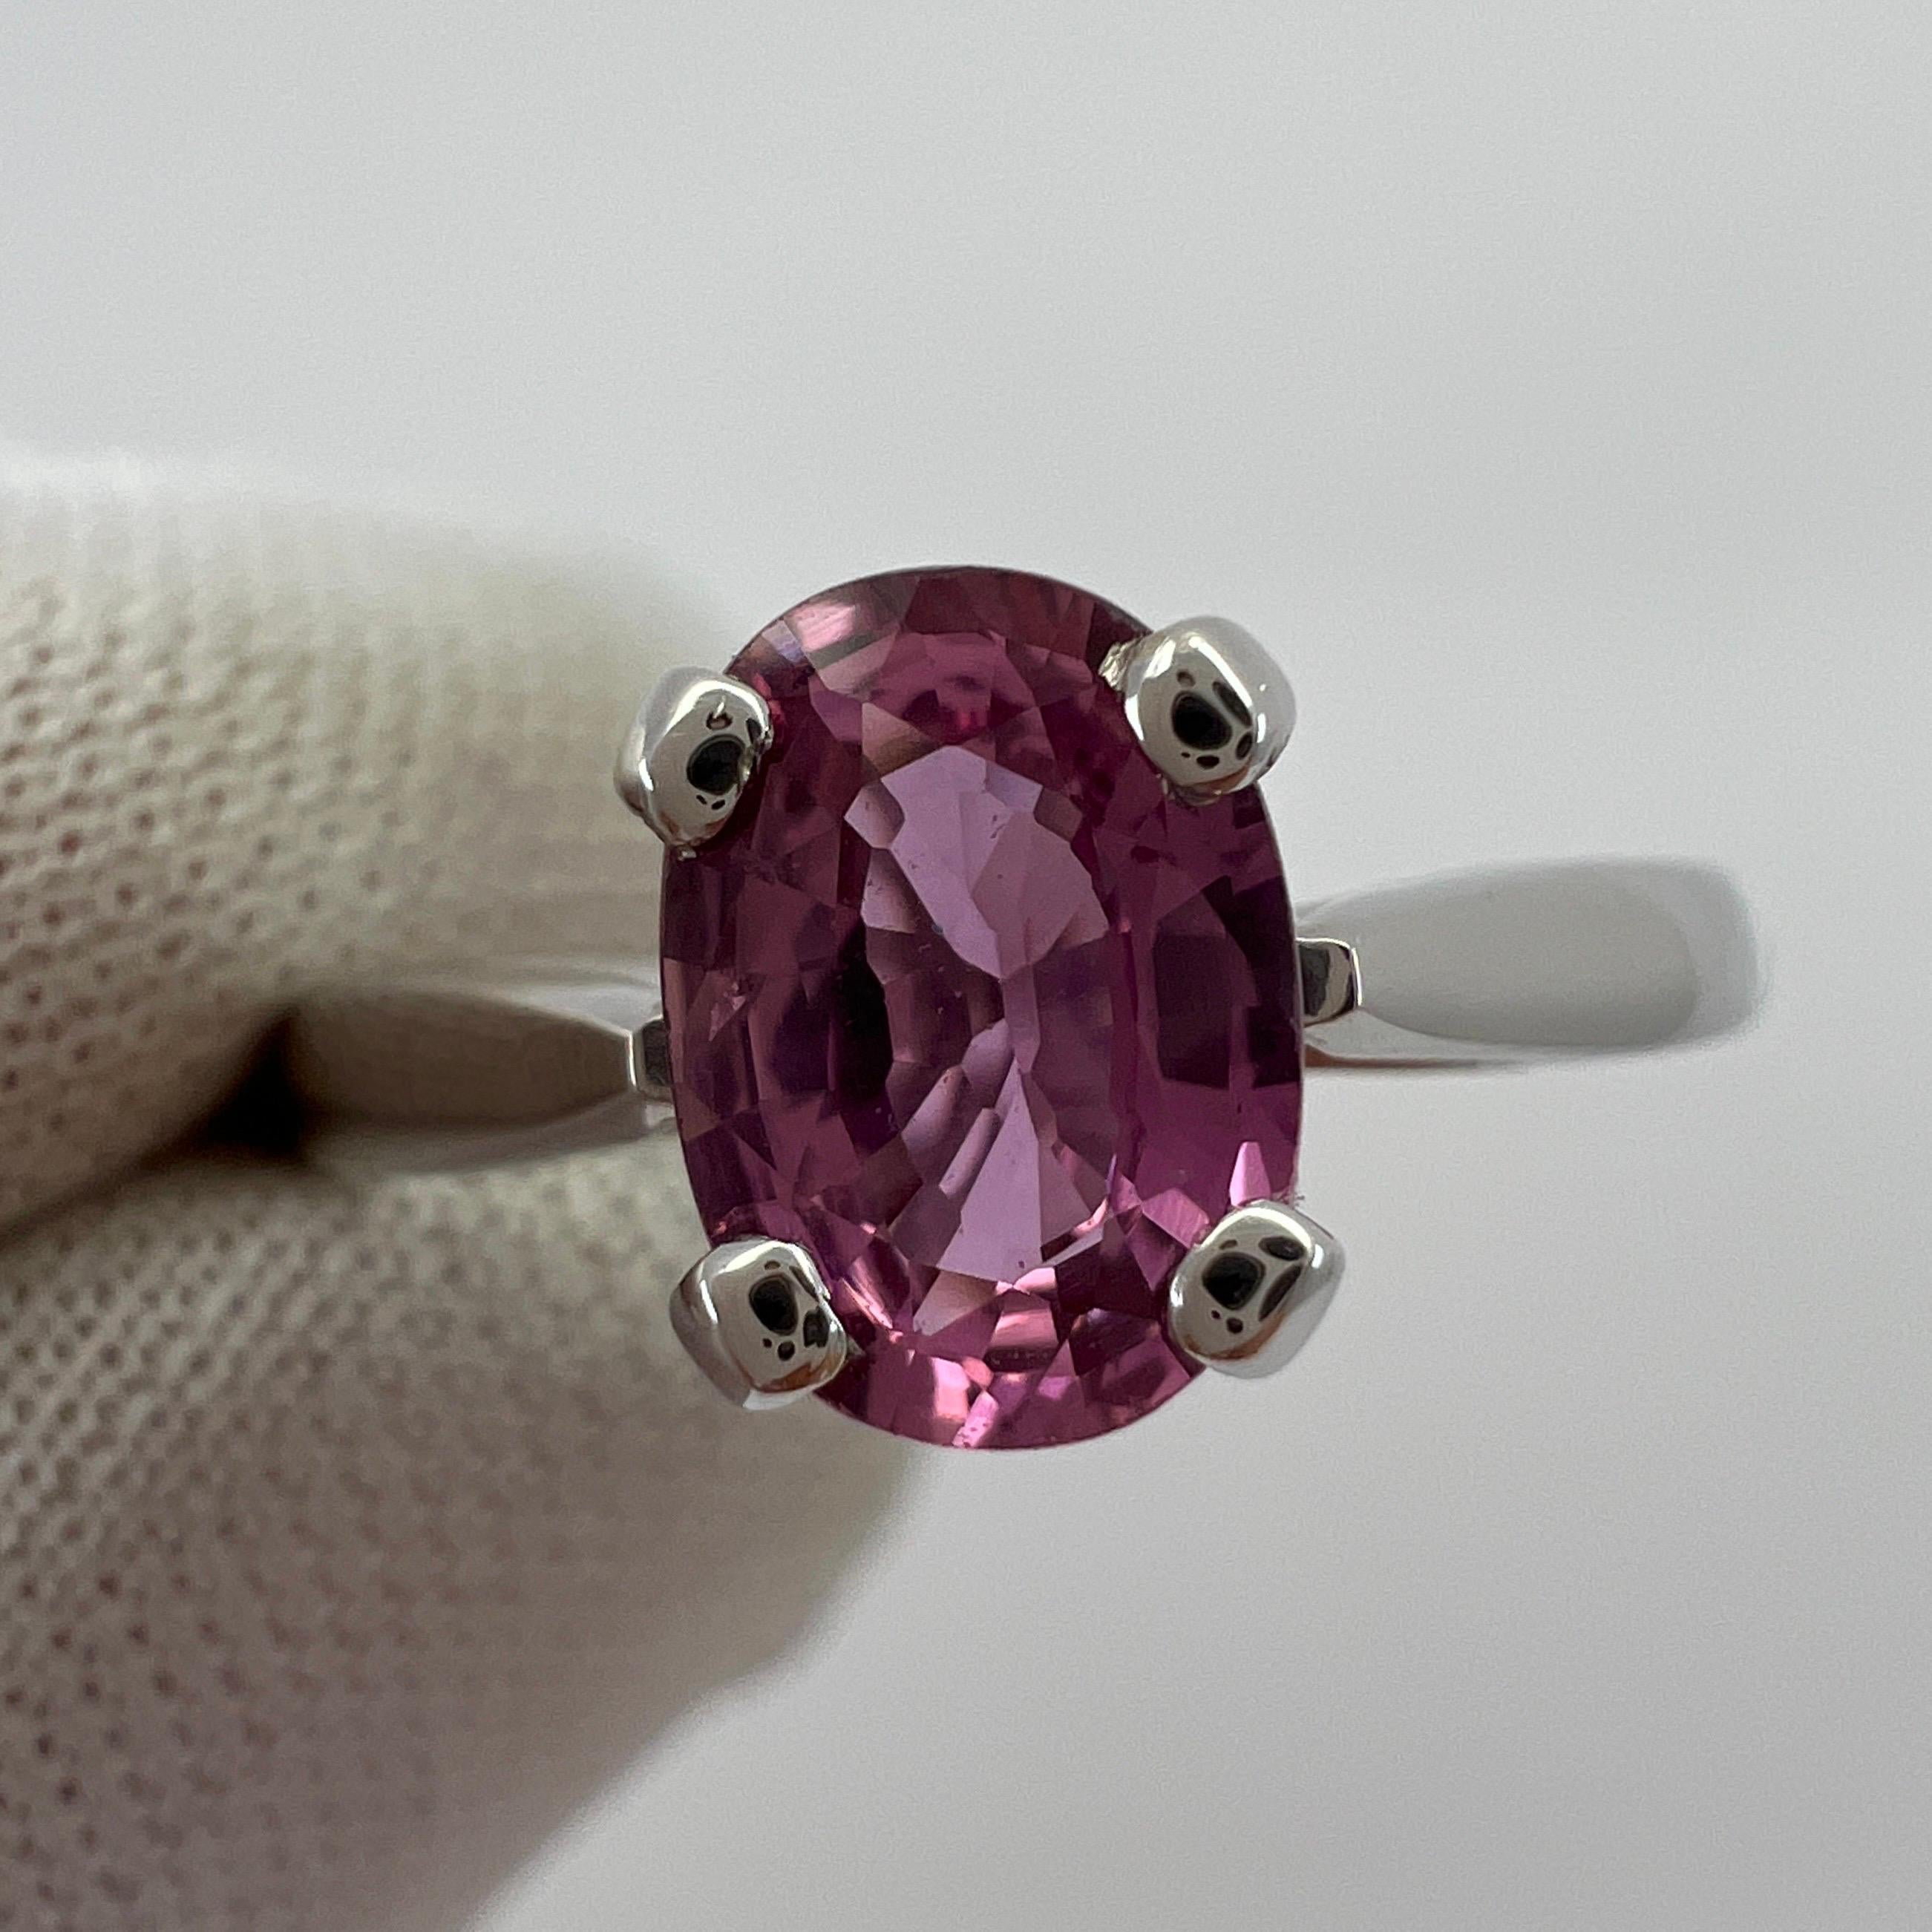 Fine Natural 1.05ct Vivid Pink Sapphire Oval Cut 18k White Gold Solitaire Ring For Sale 7